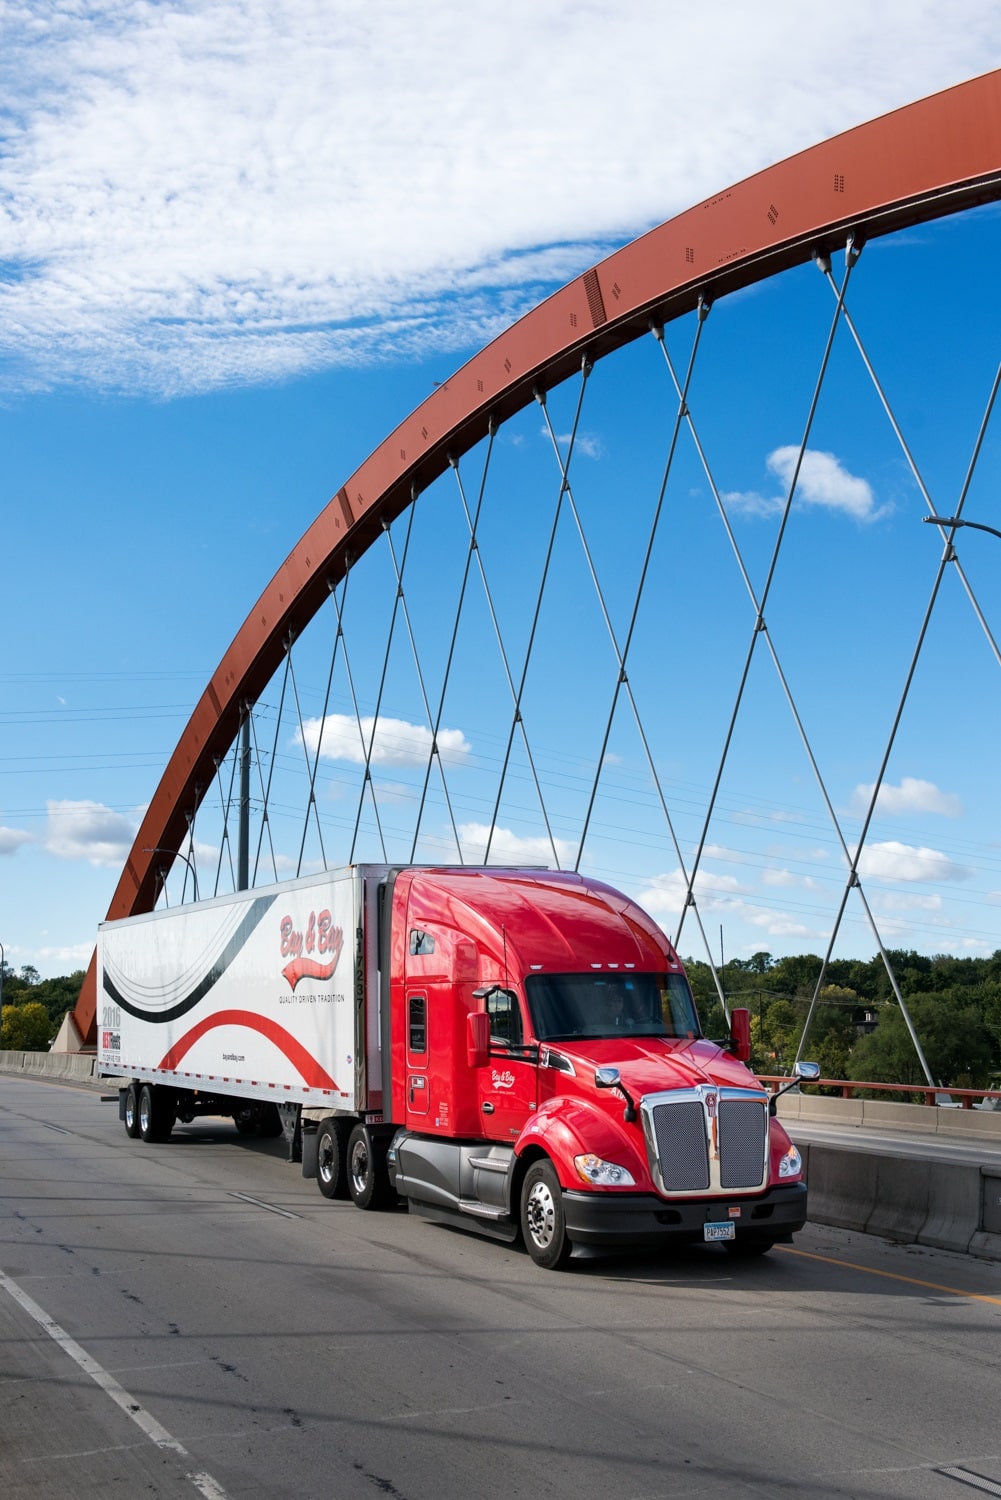 The Origin and History of Truck Stops in America - Bay and Bay  Transportation